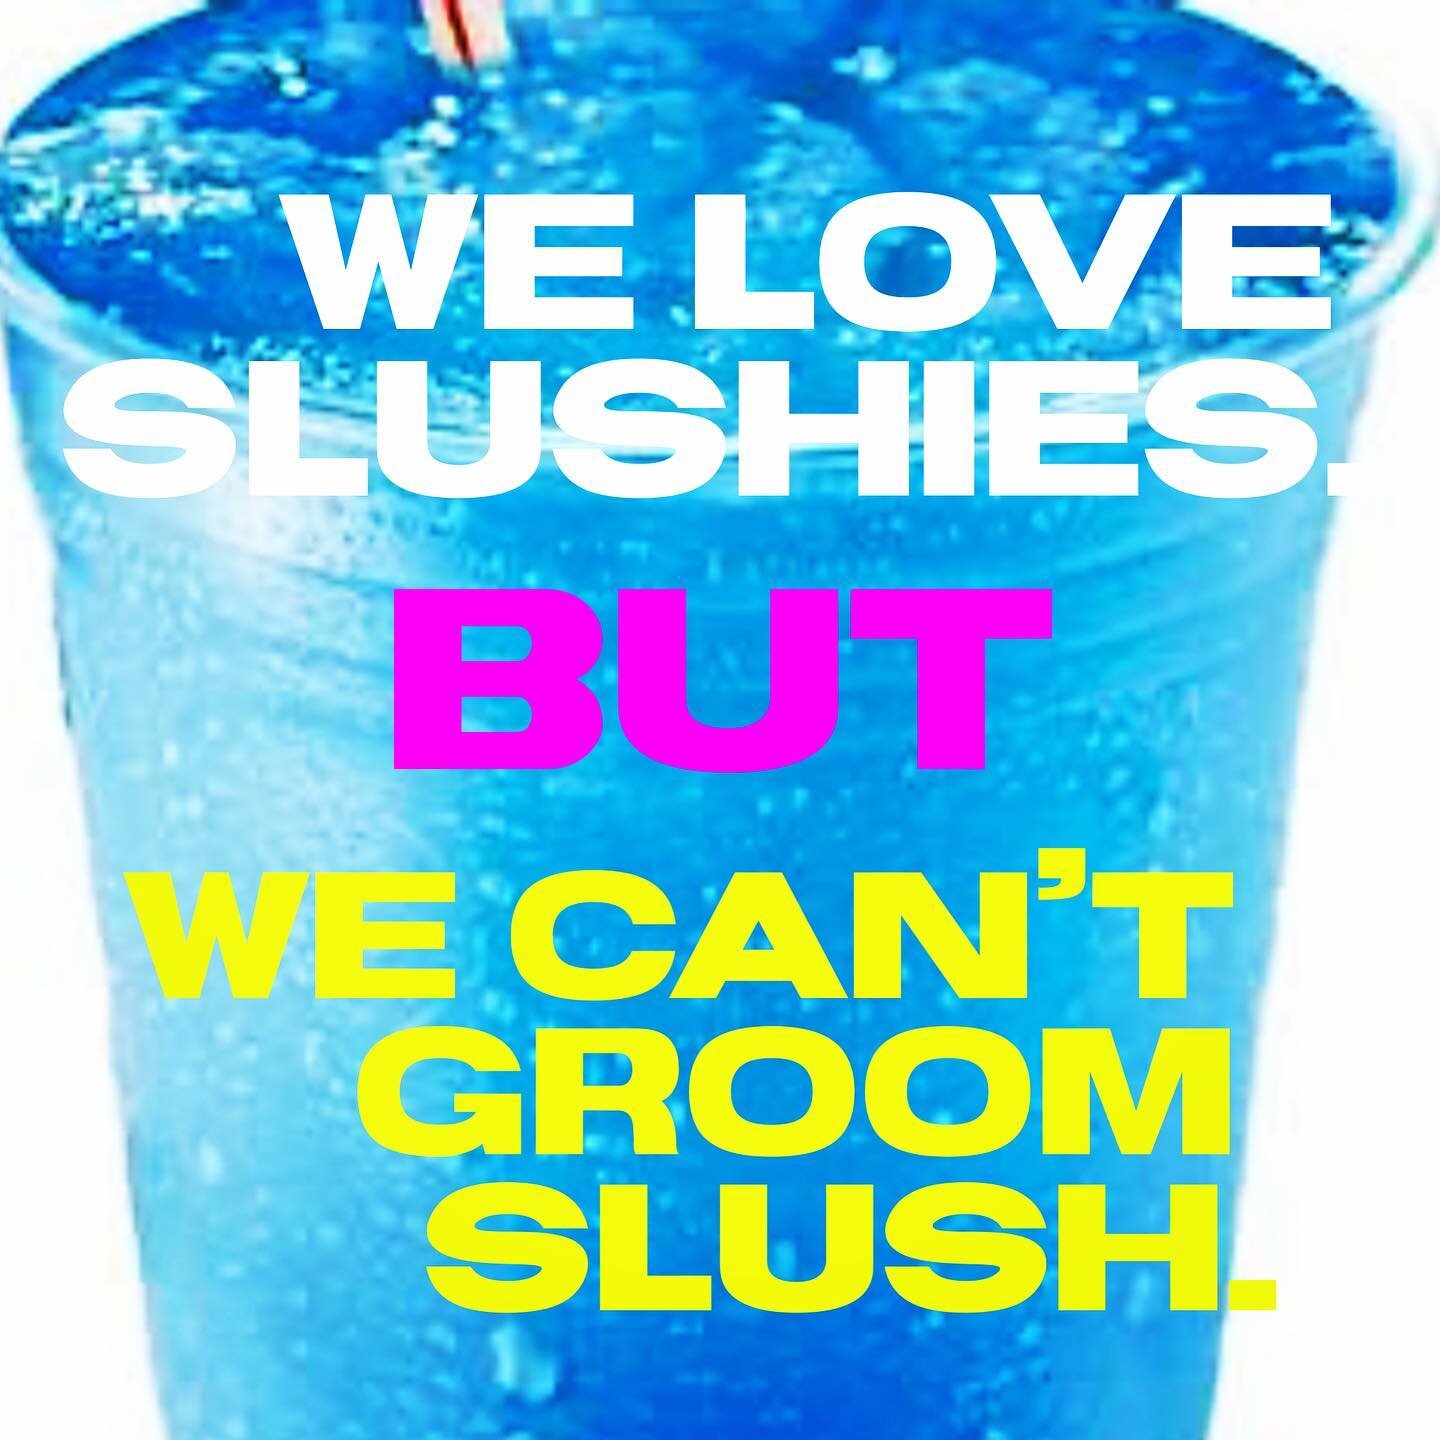 We like slushies as much as anyone, but you can&rsquo;t groom slush: it packs down to ice. 

We hope to groom Sunday AM after the snow (slush) converts to frozen granular after tonight&rsquo;s forecast cooldown. Unfortunately, we won&rsquo;t know wha